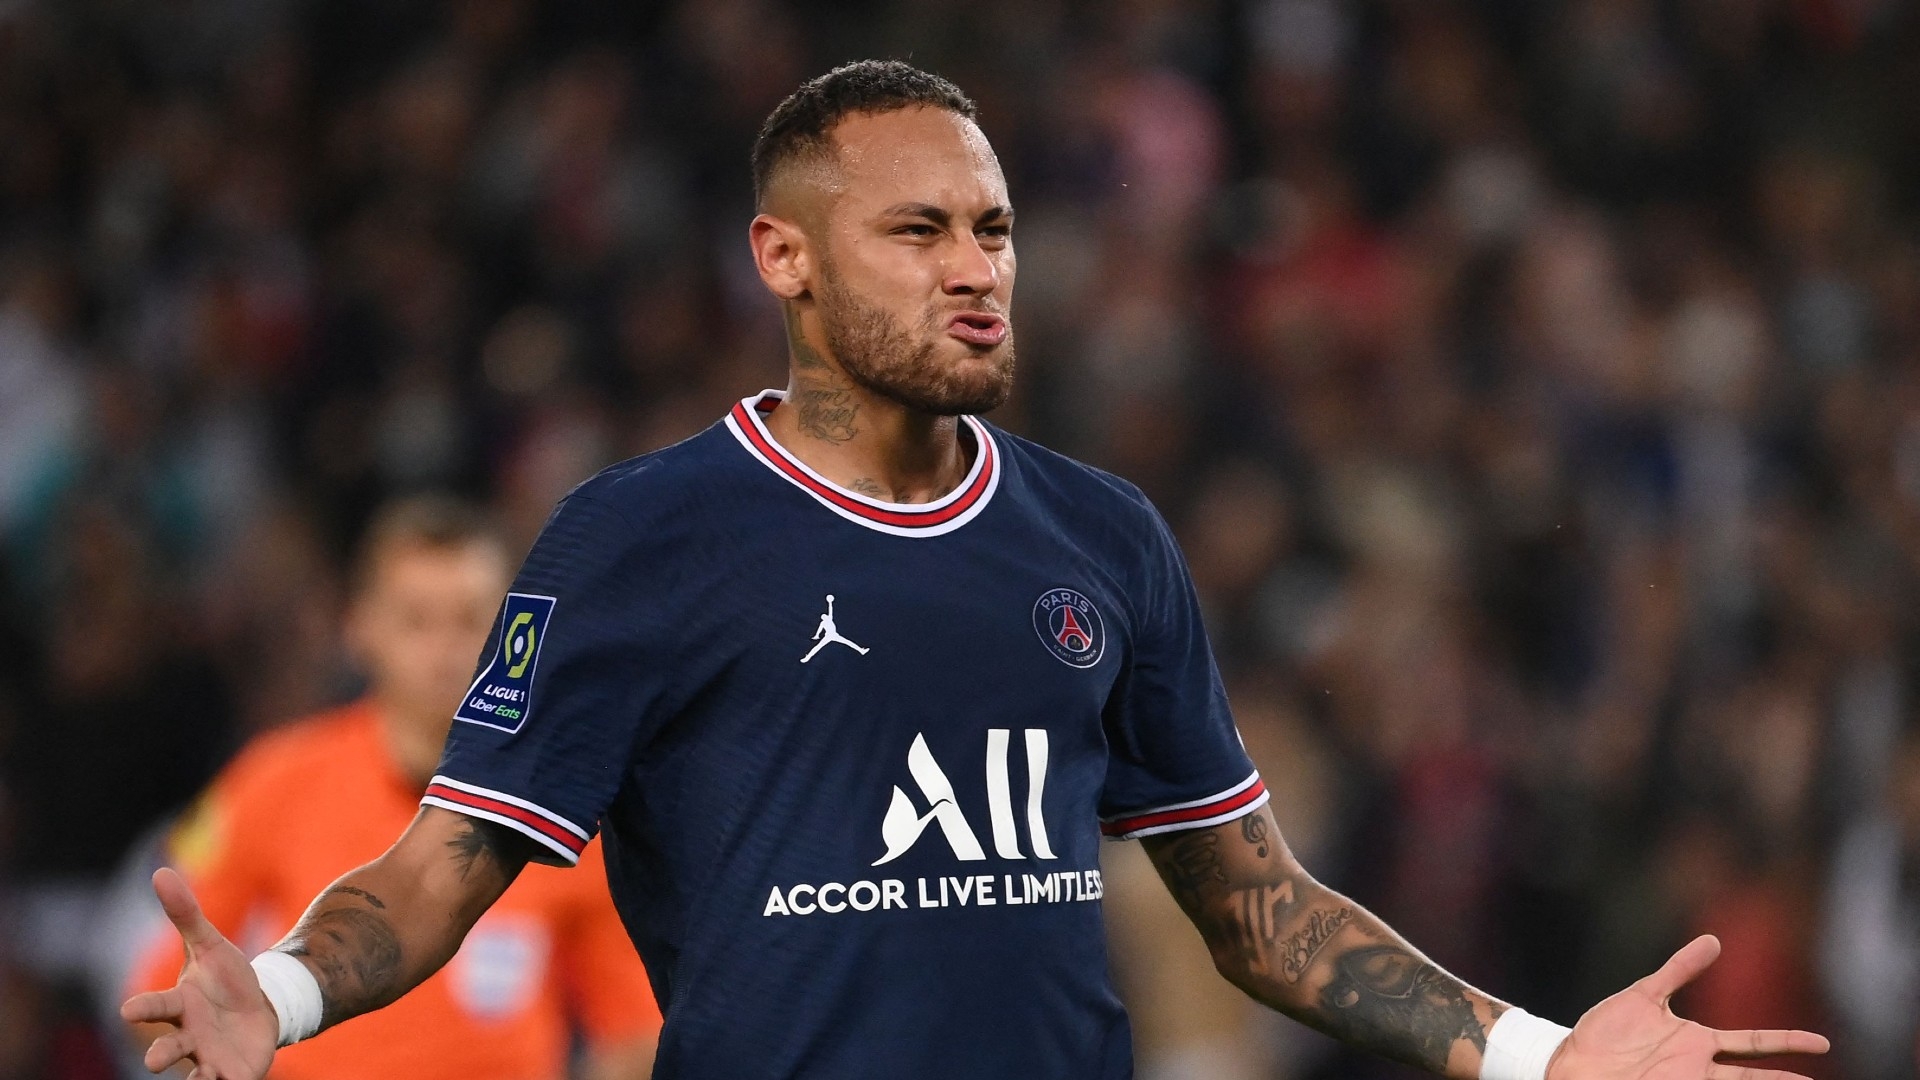 I would not be at the top level if I were not serious&#39; - Neymar hits back  at critics over party lifestyle accusations | Goal.com